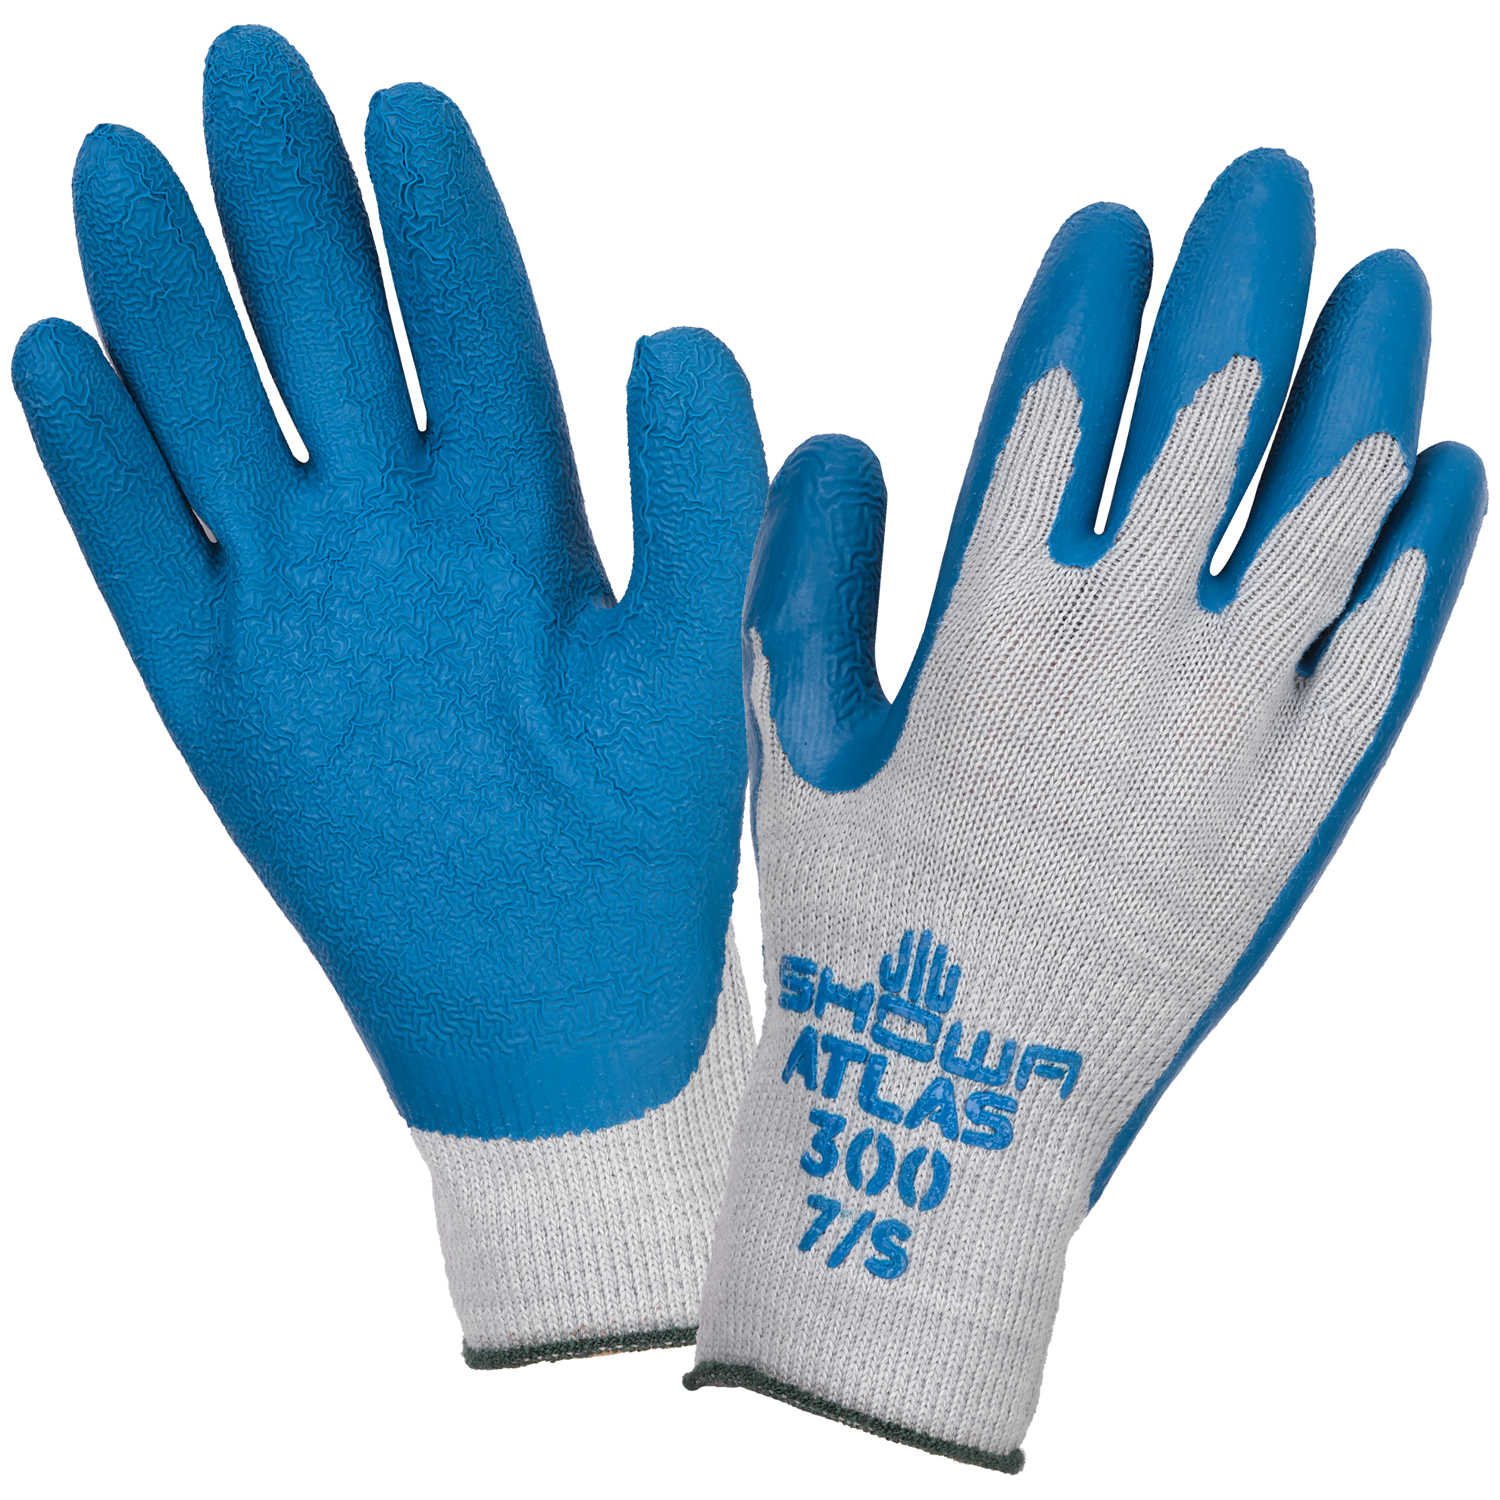 SHOWA ATLAS FIT 300 NATURAL RUBBER PALM COATED WORK GLOVES BLUE GENERAL PURPOSE 